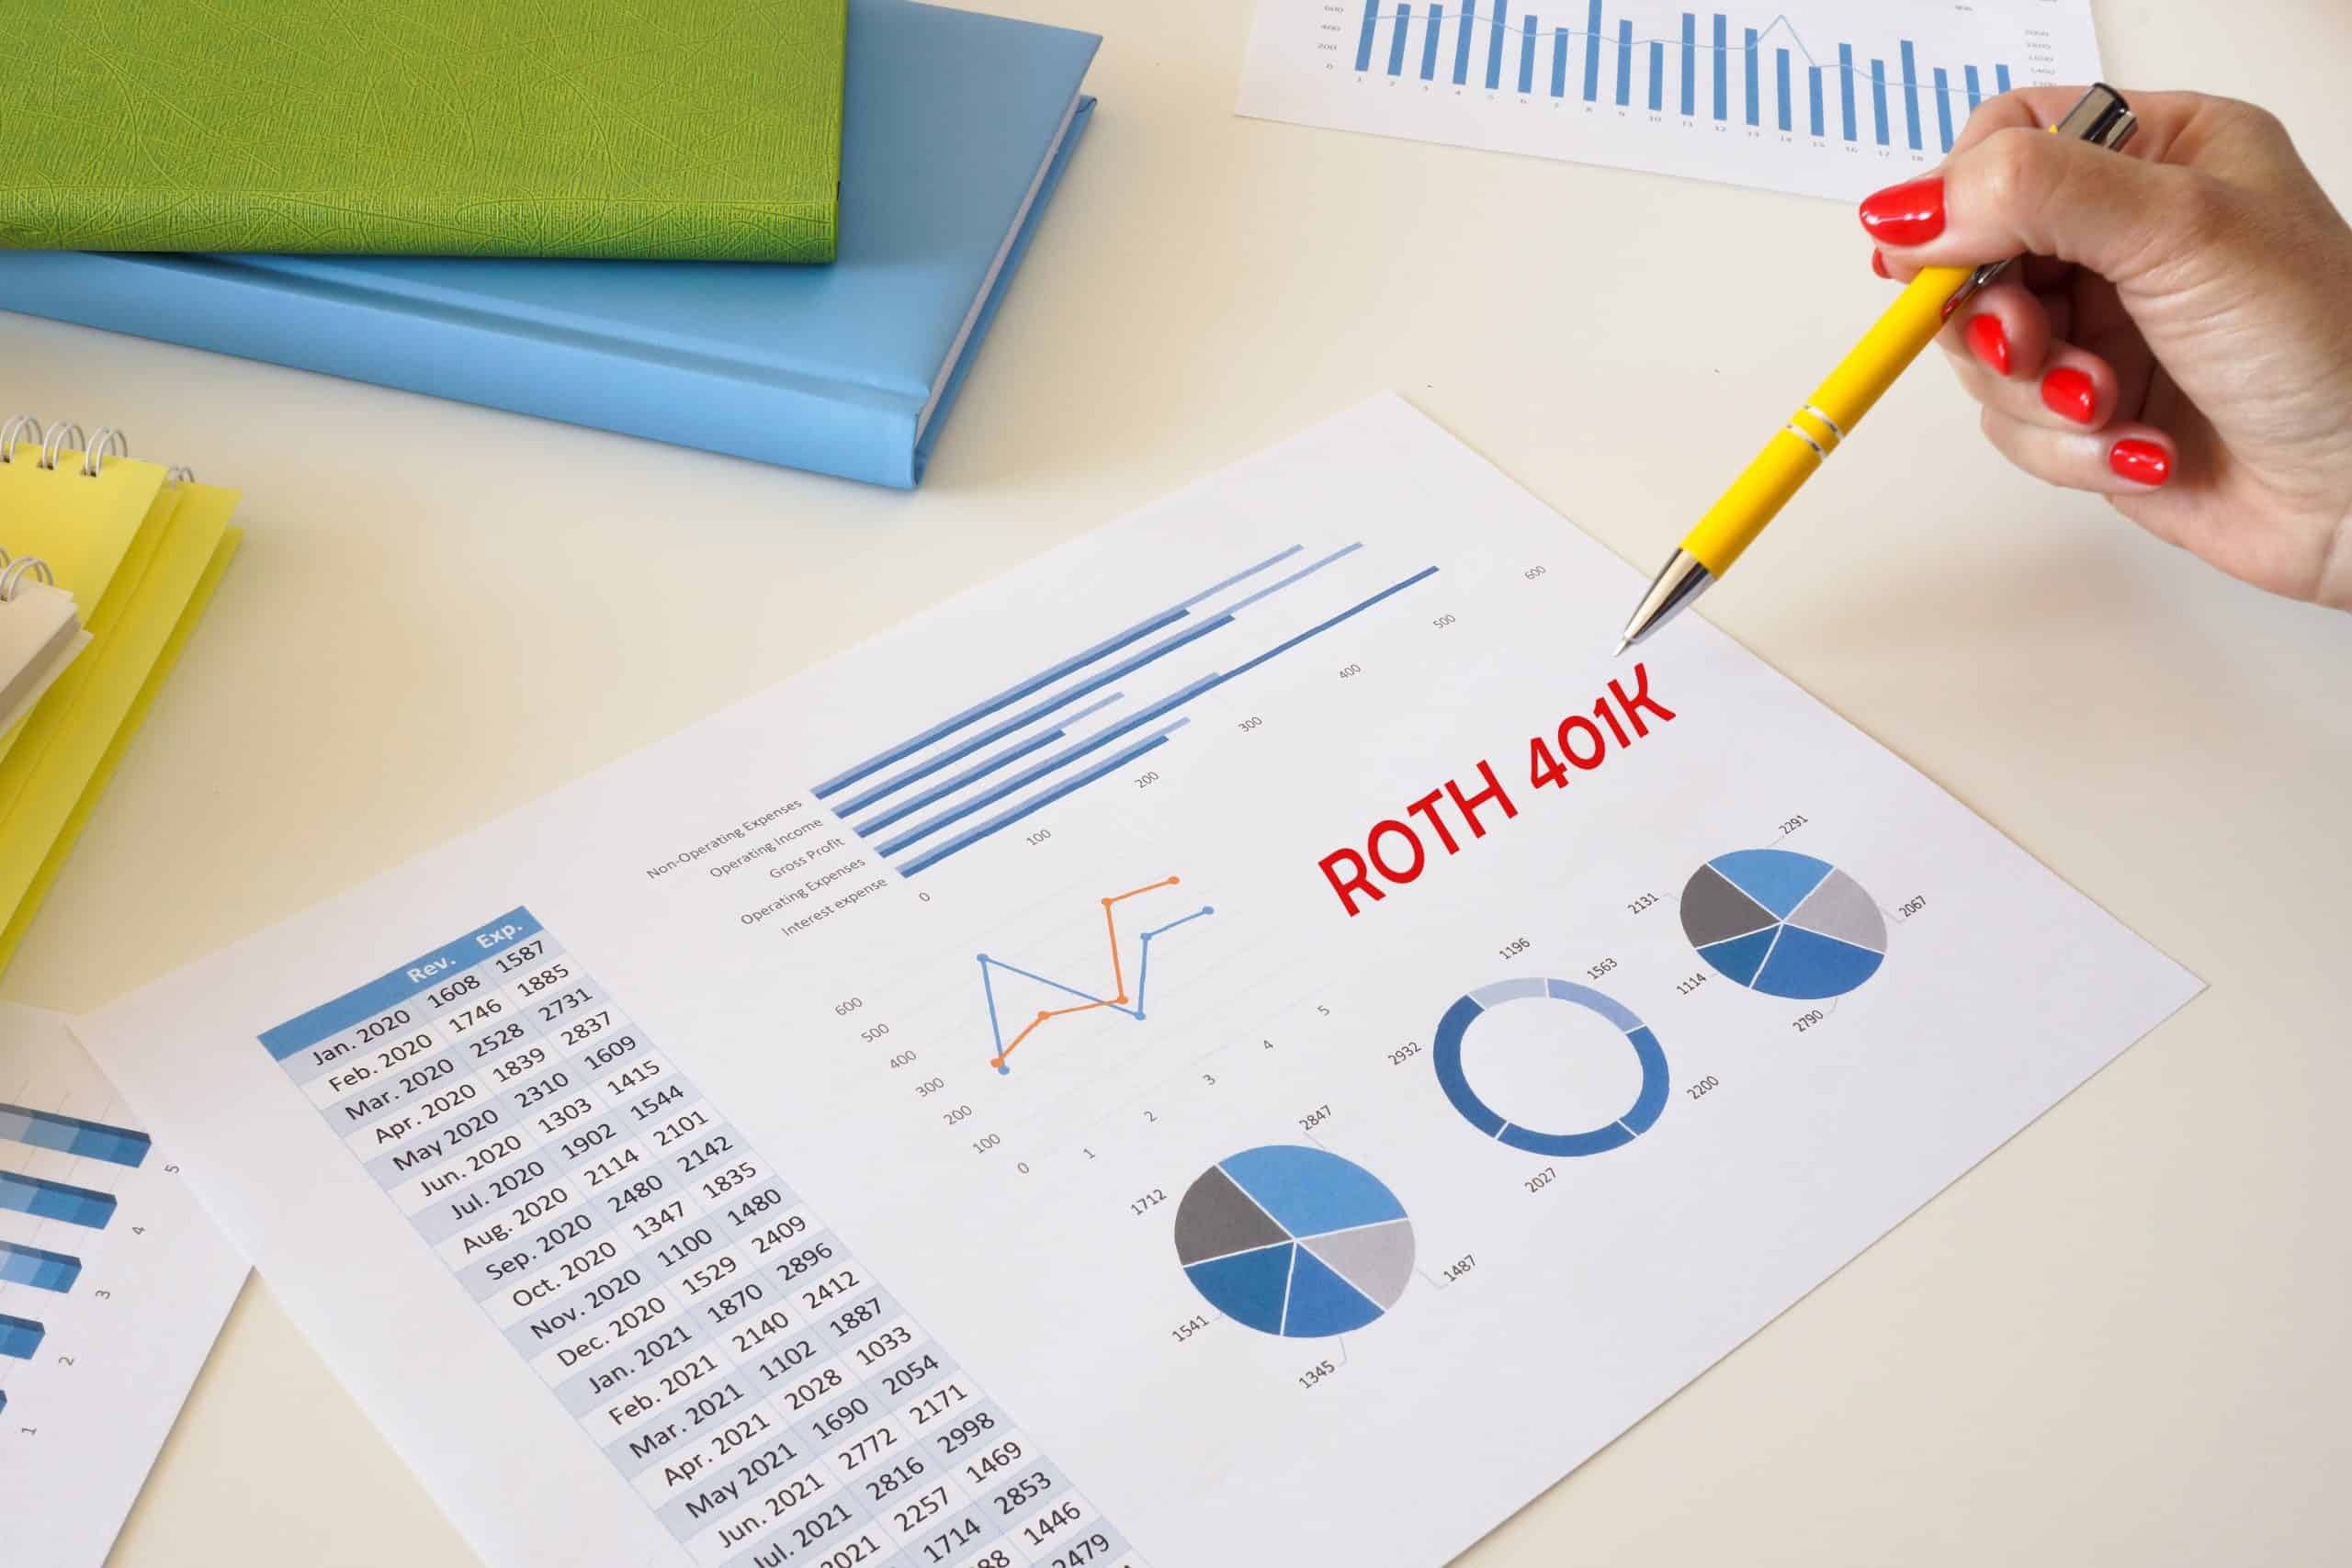 Roth Solo 401k 5 Year Holding Period